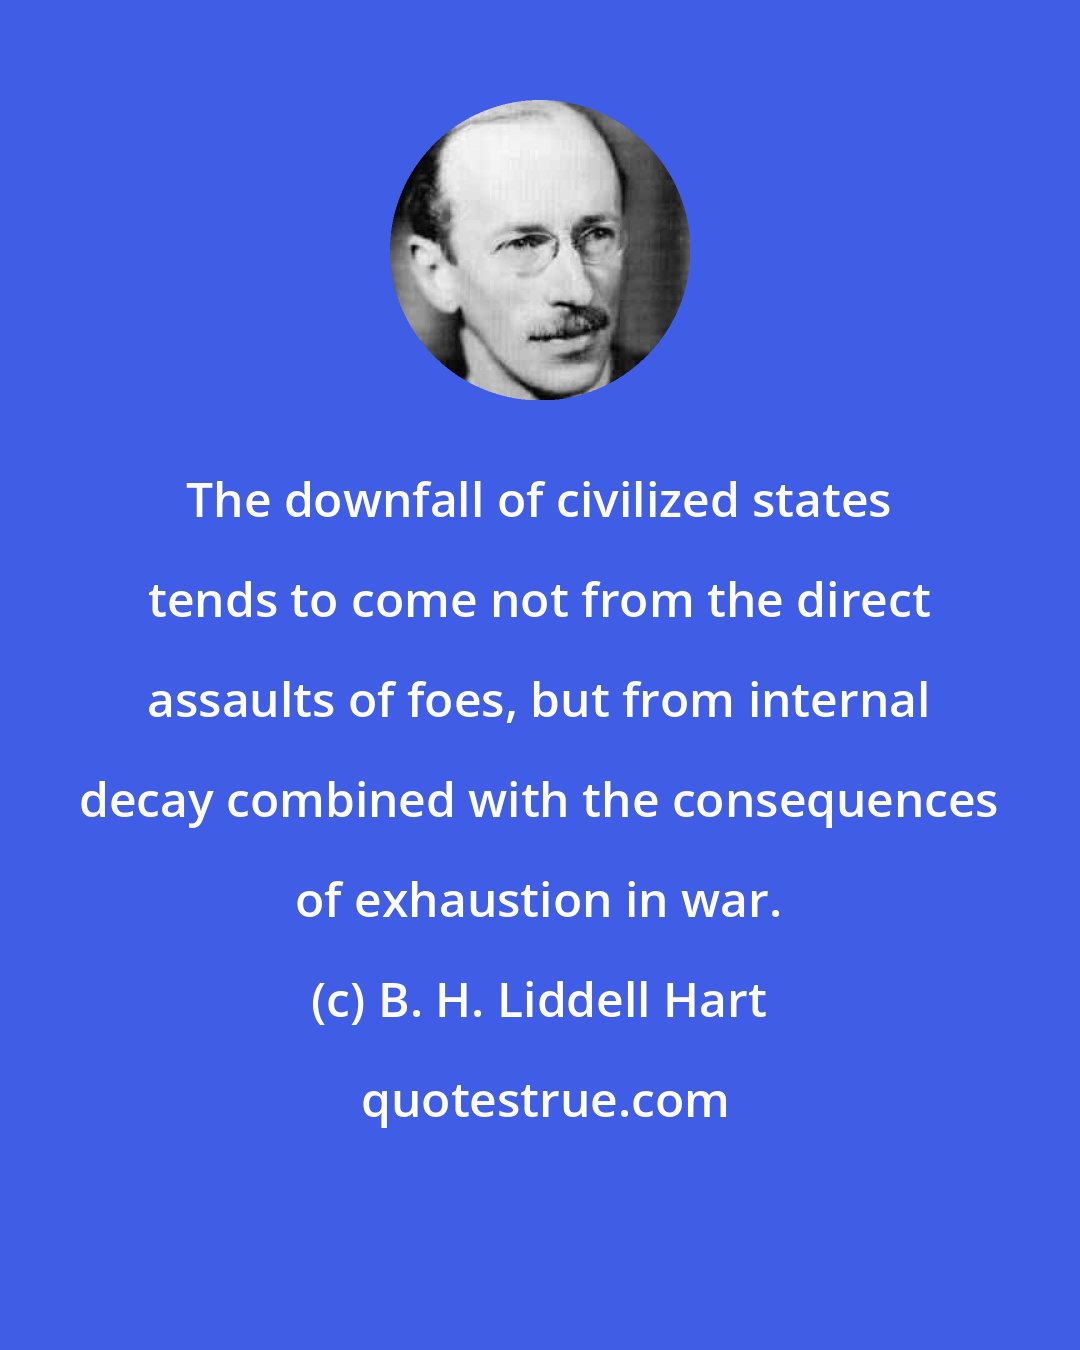 B. H. Liddell Hart: The downfall of civilized states tends to come not from the direct assaults of foes, but from internal decay combined with the consequences of exhaustion in war.